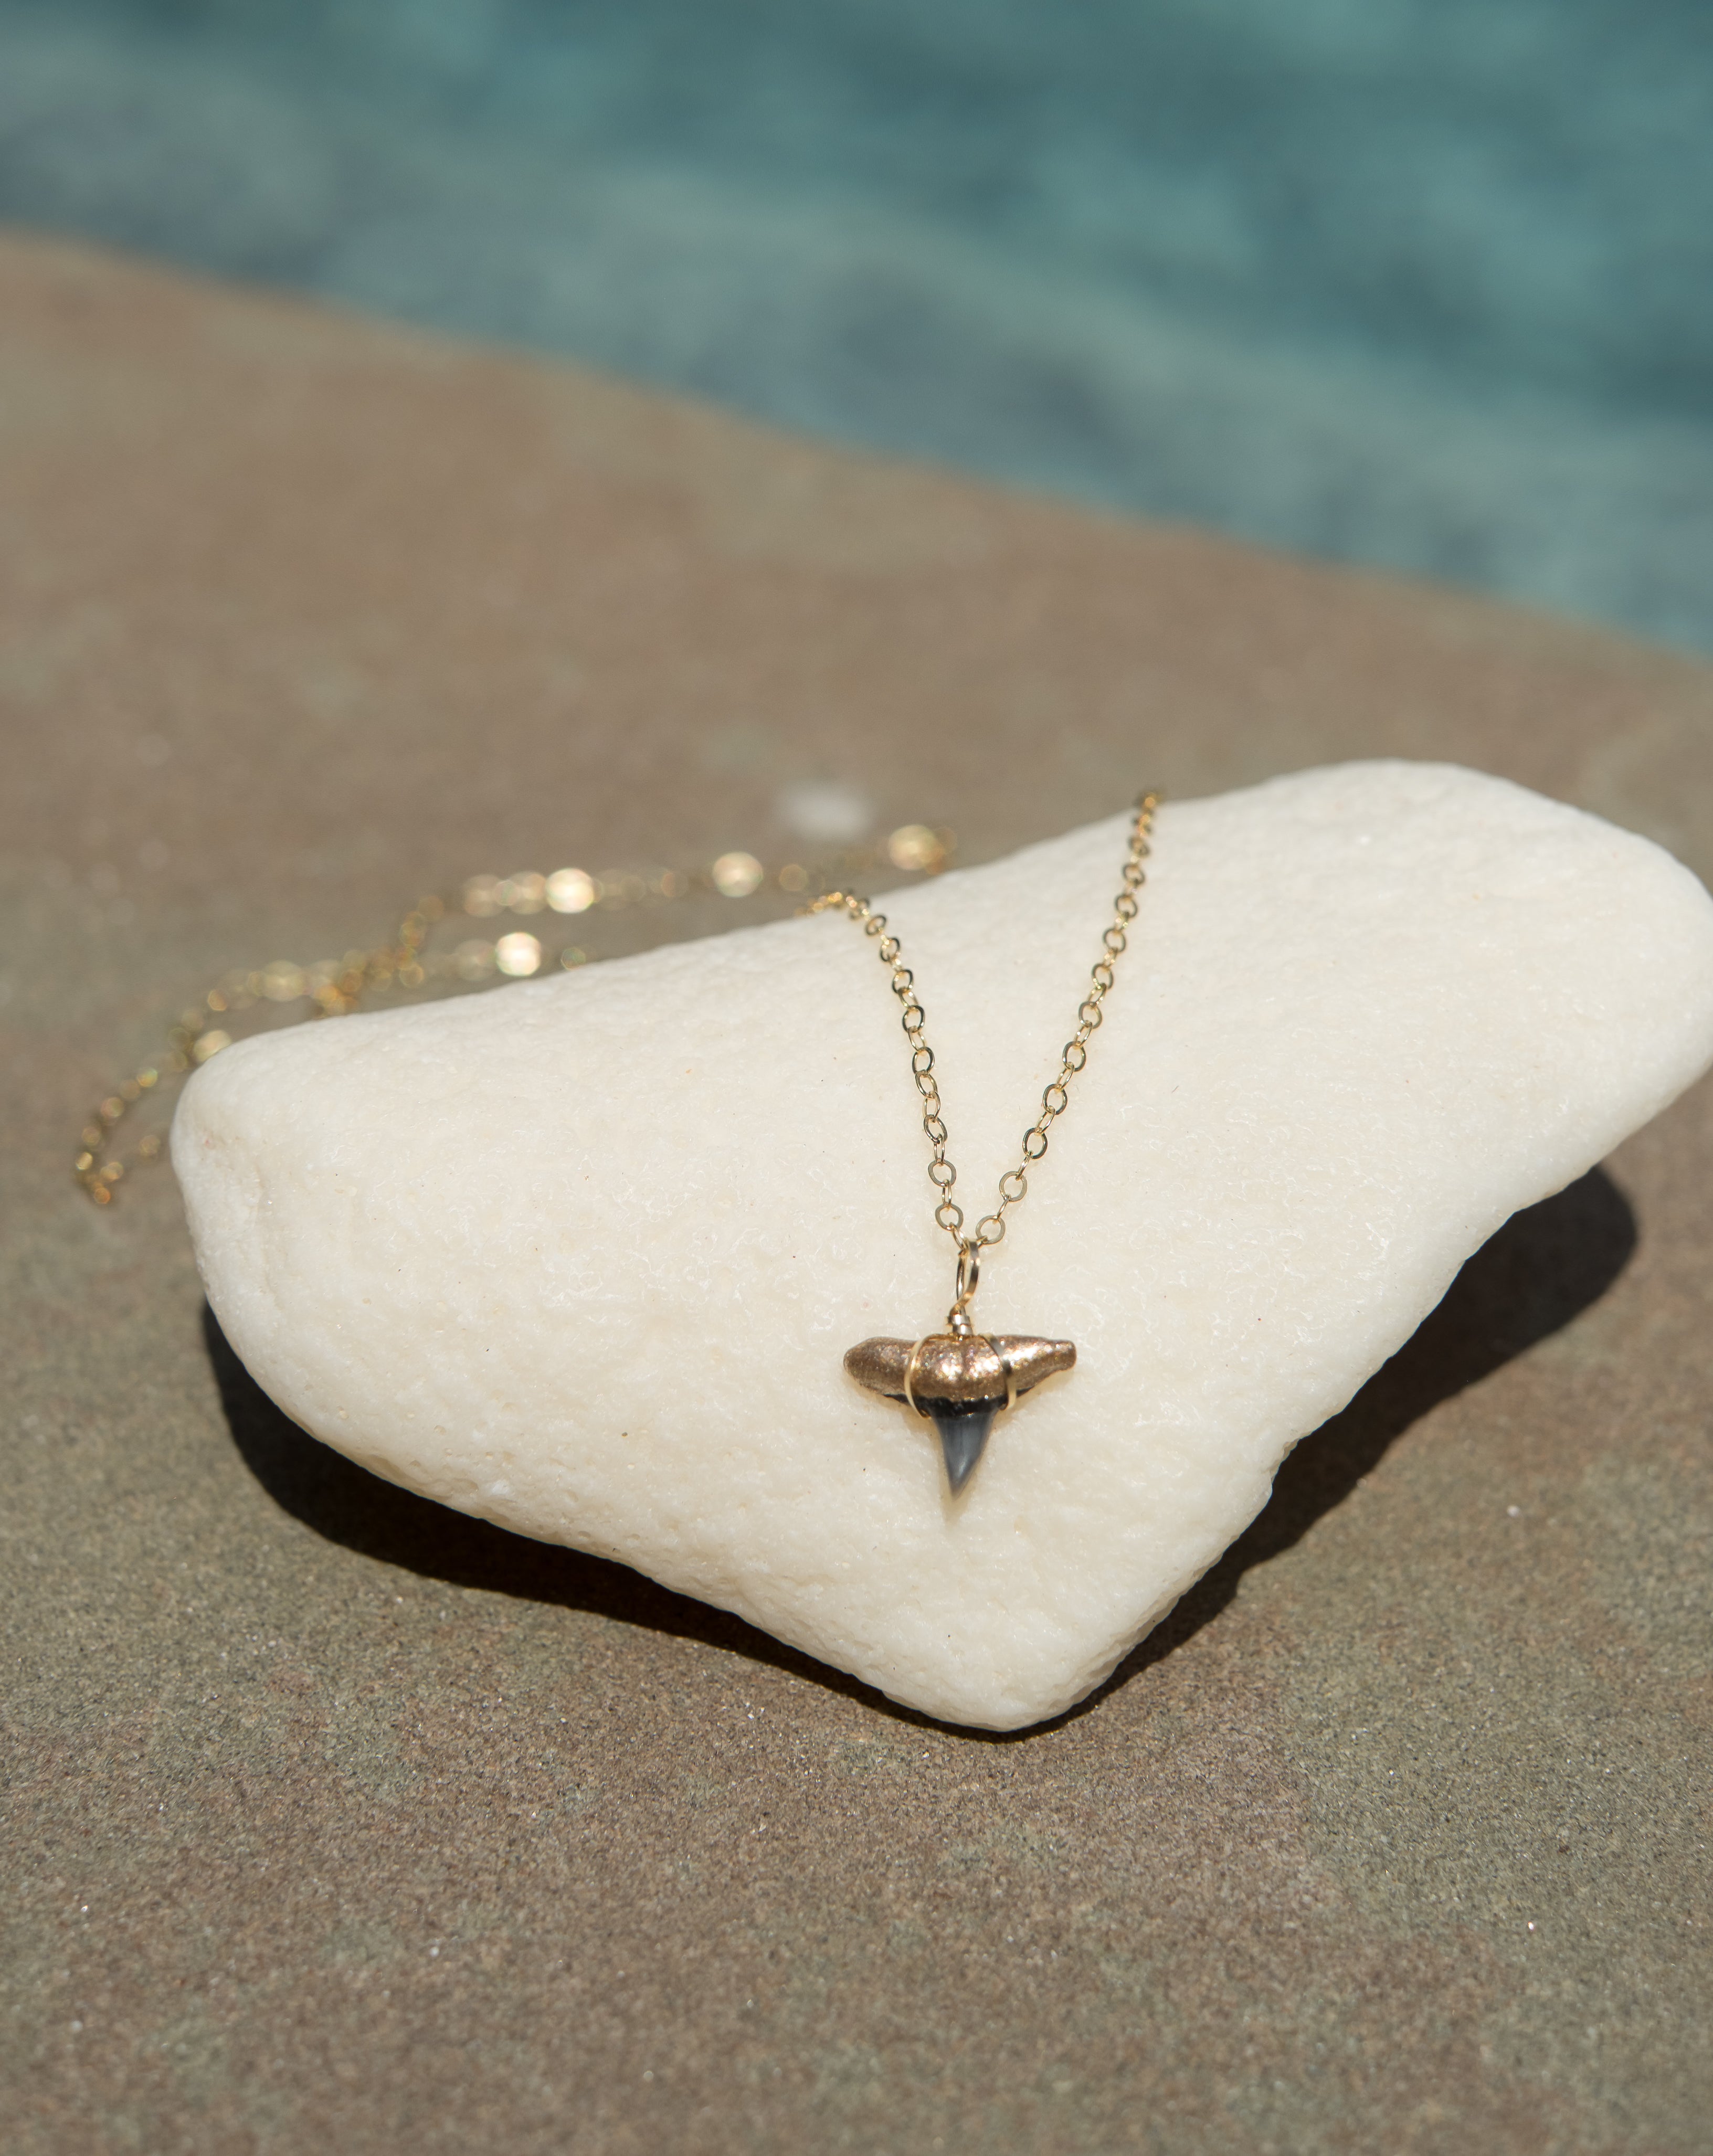 Murky Water Sharks Tooth Necklace – Charming Shark Retail